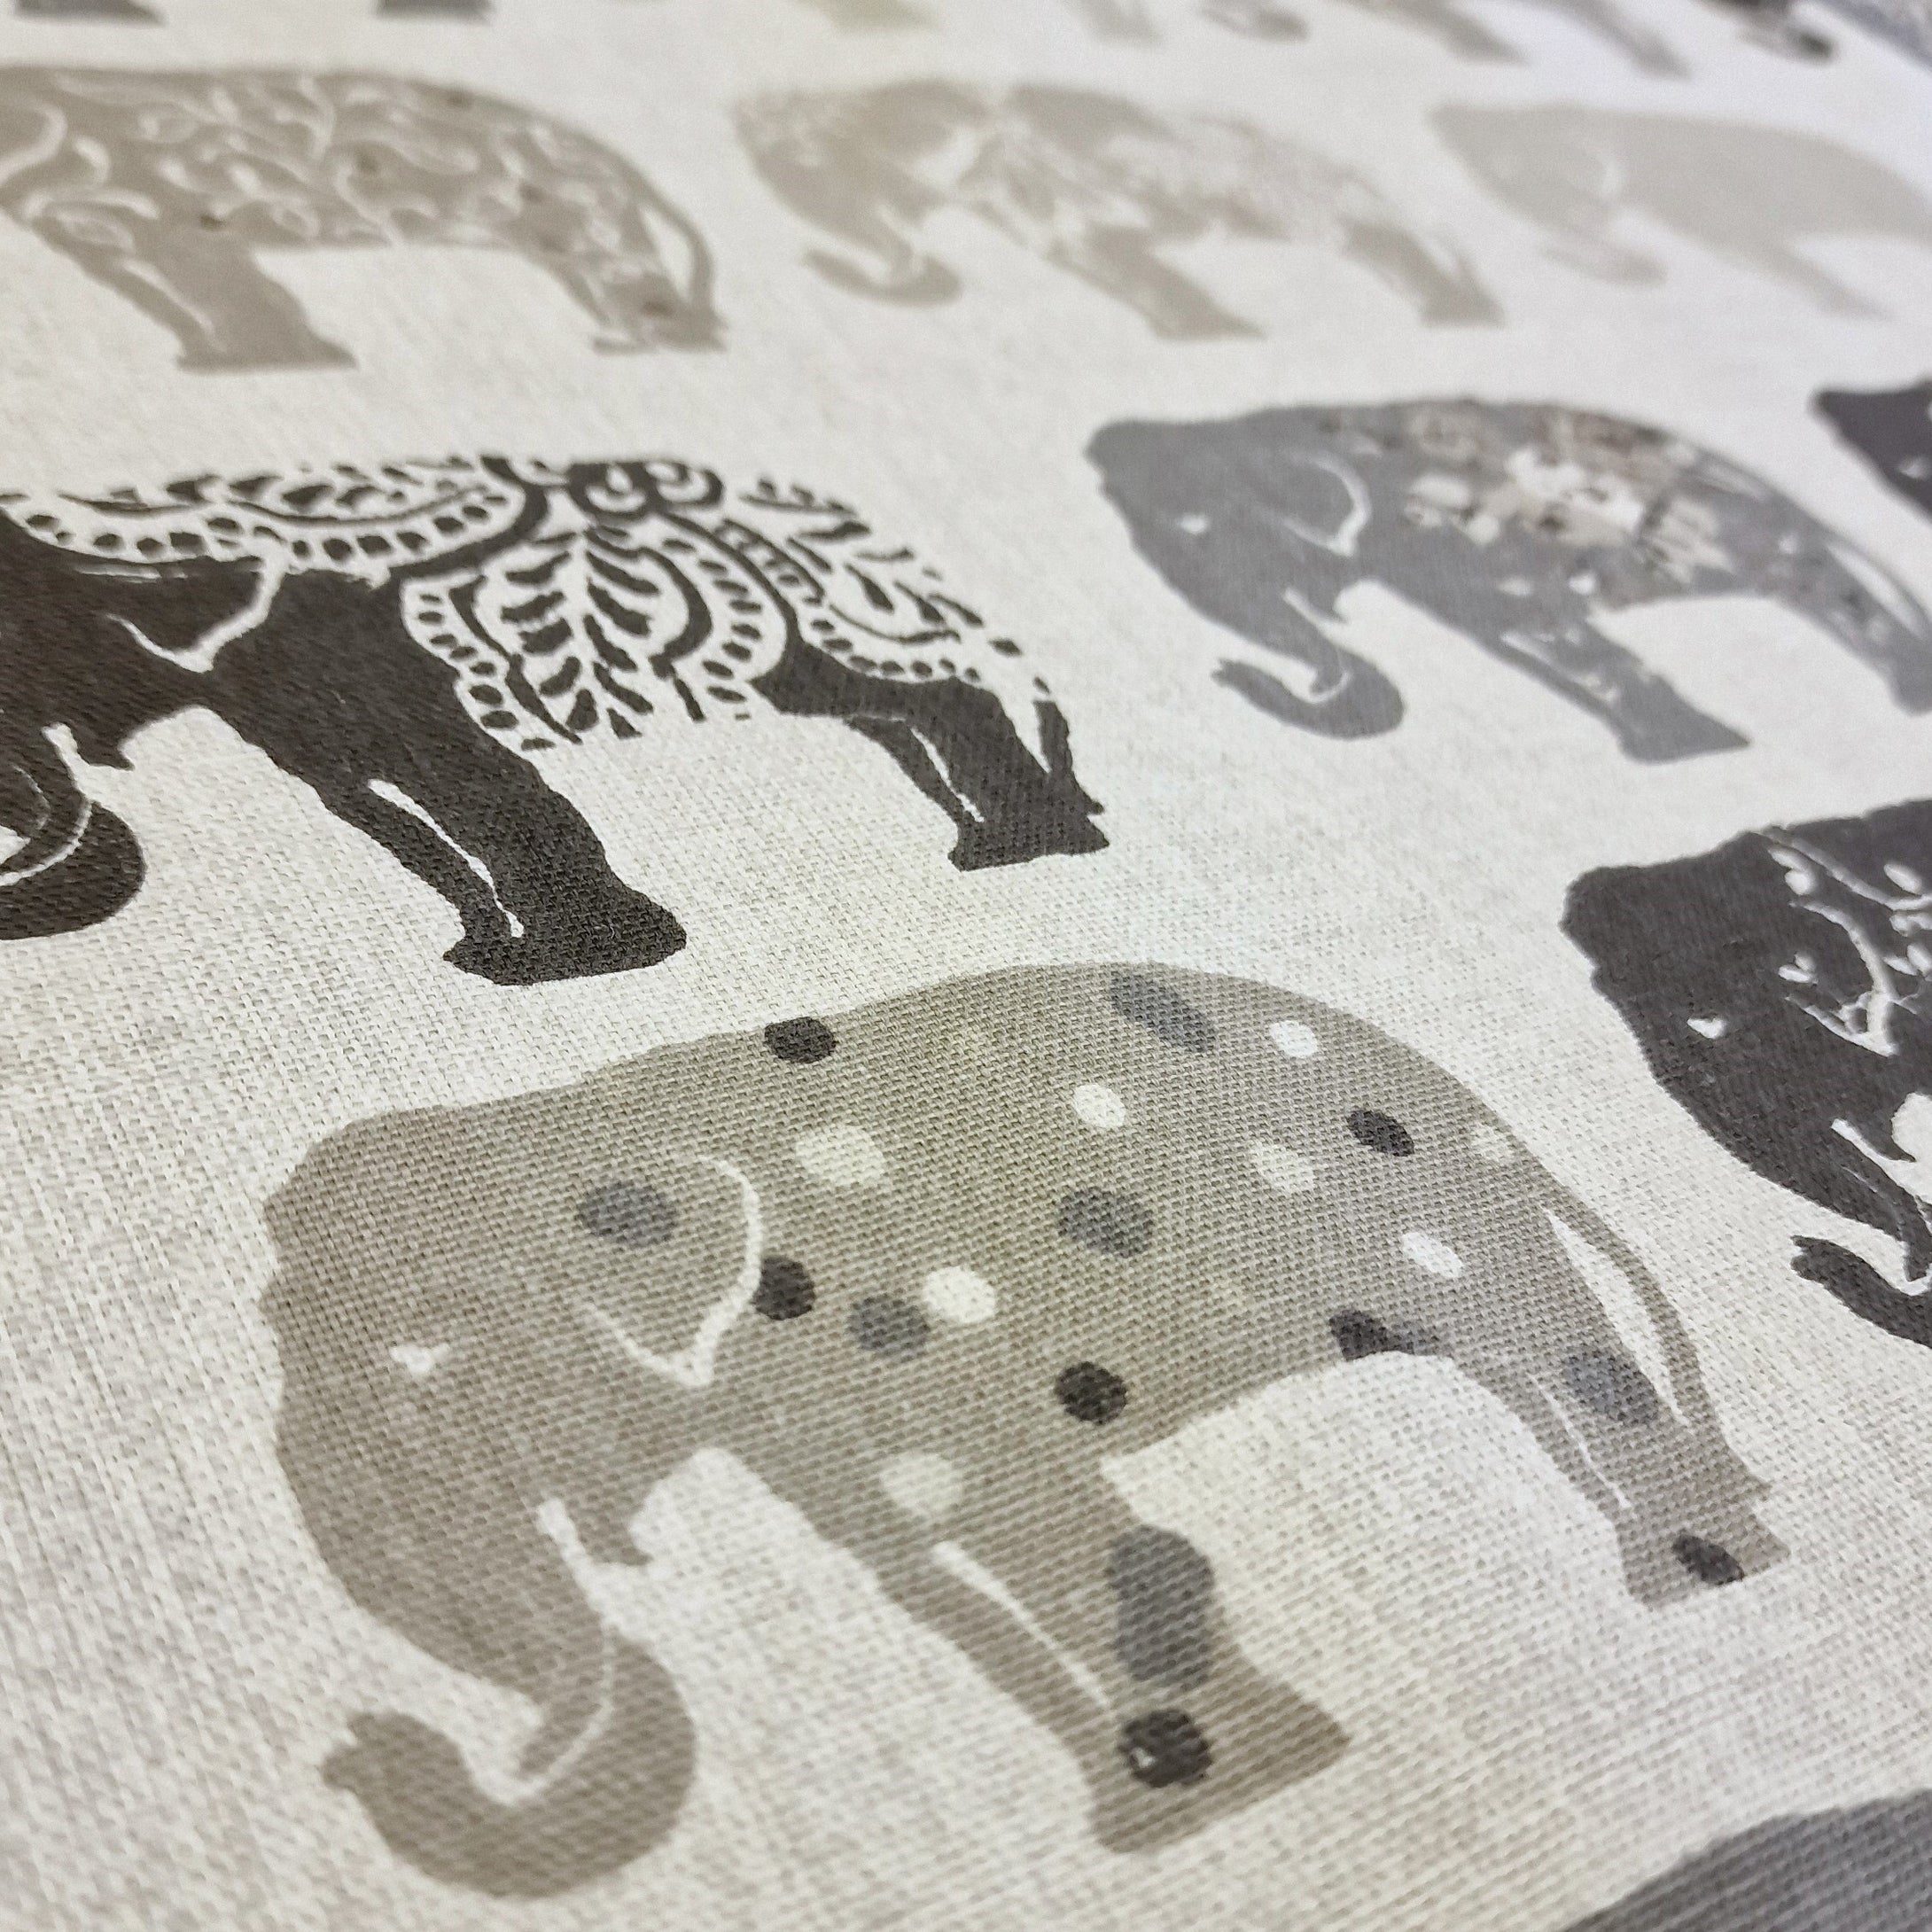 Tablecloth, Grey Elephants, in 5 sizes, Wipe Clean or Cotton material